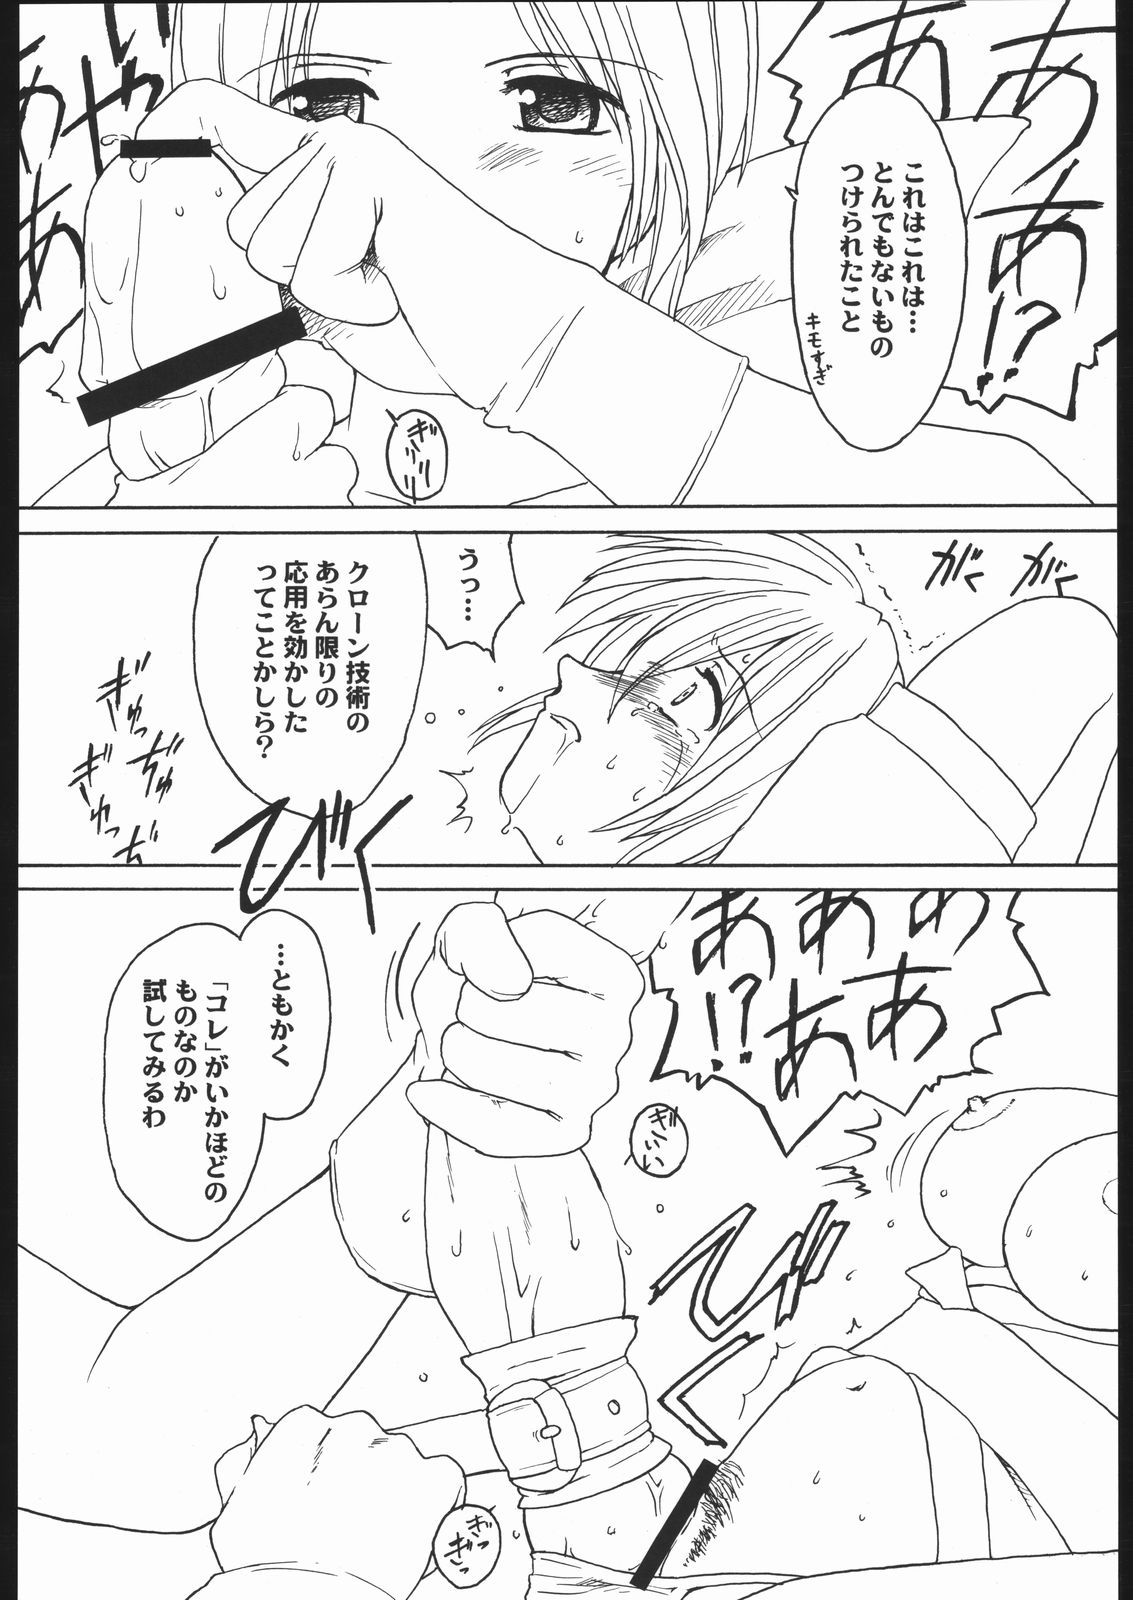 (C68) [Milts Chaya (Milts)] Abnormitaten (Dead or Alive) page 9 full